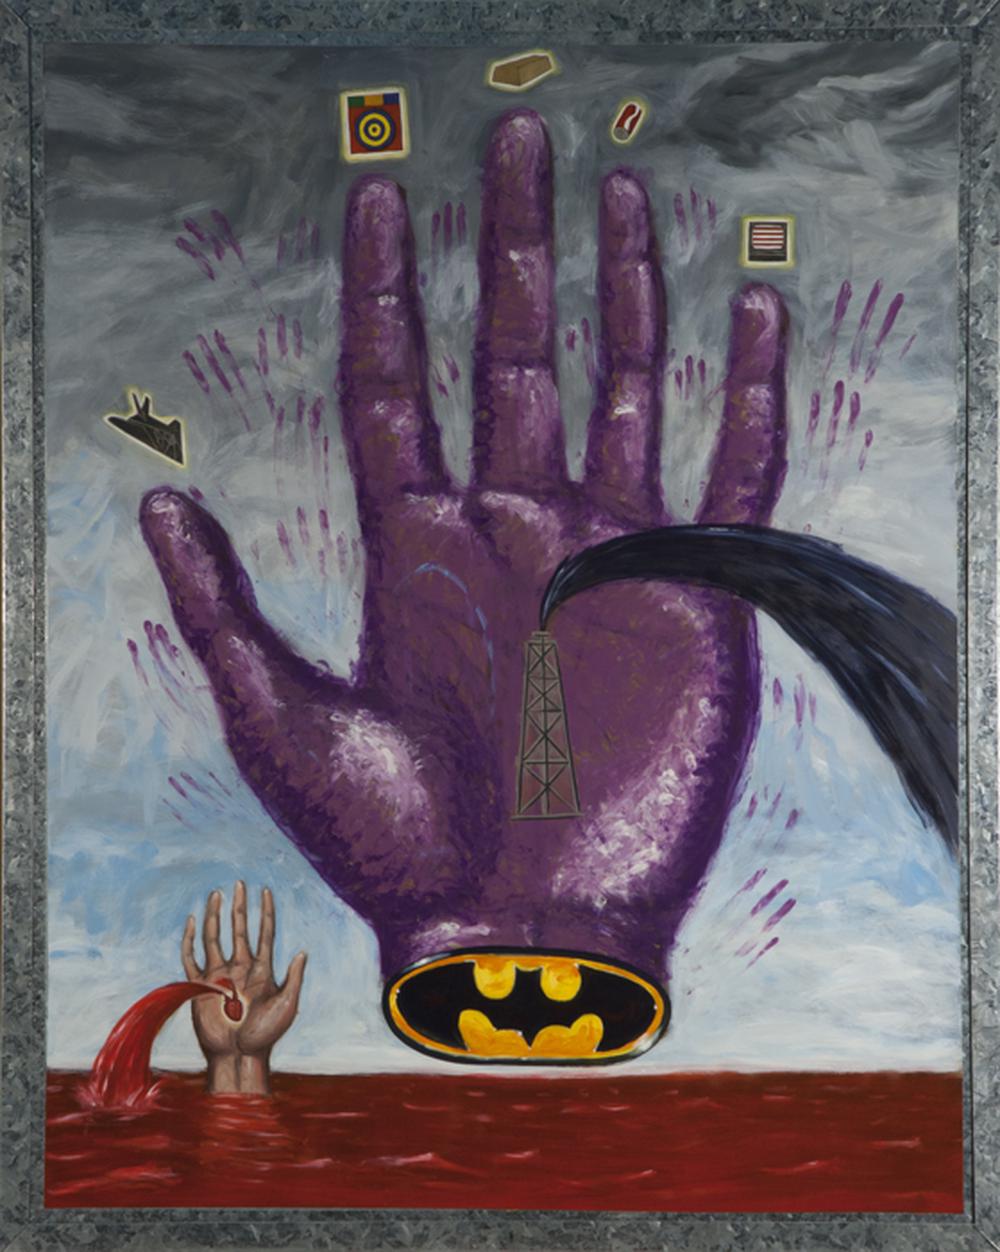 a painting of a purple floating hand with the batman symbol on the base of the palm while the palm spews unrefined oil over a bleedding human hand bleeding from a heart in its palm causing a sea of red against the gray sky in the horizon